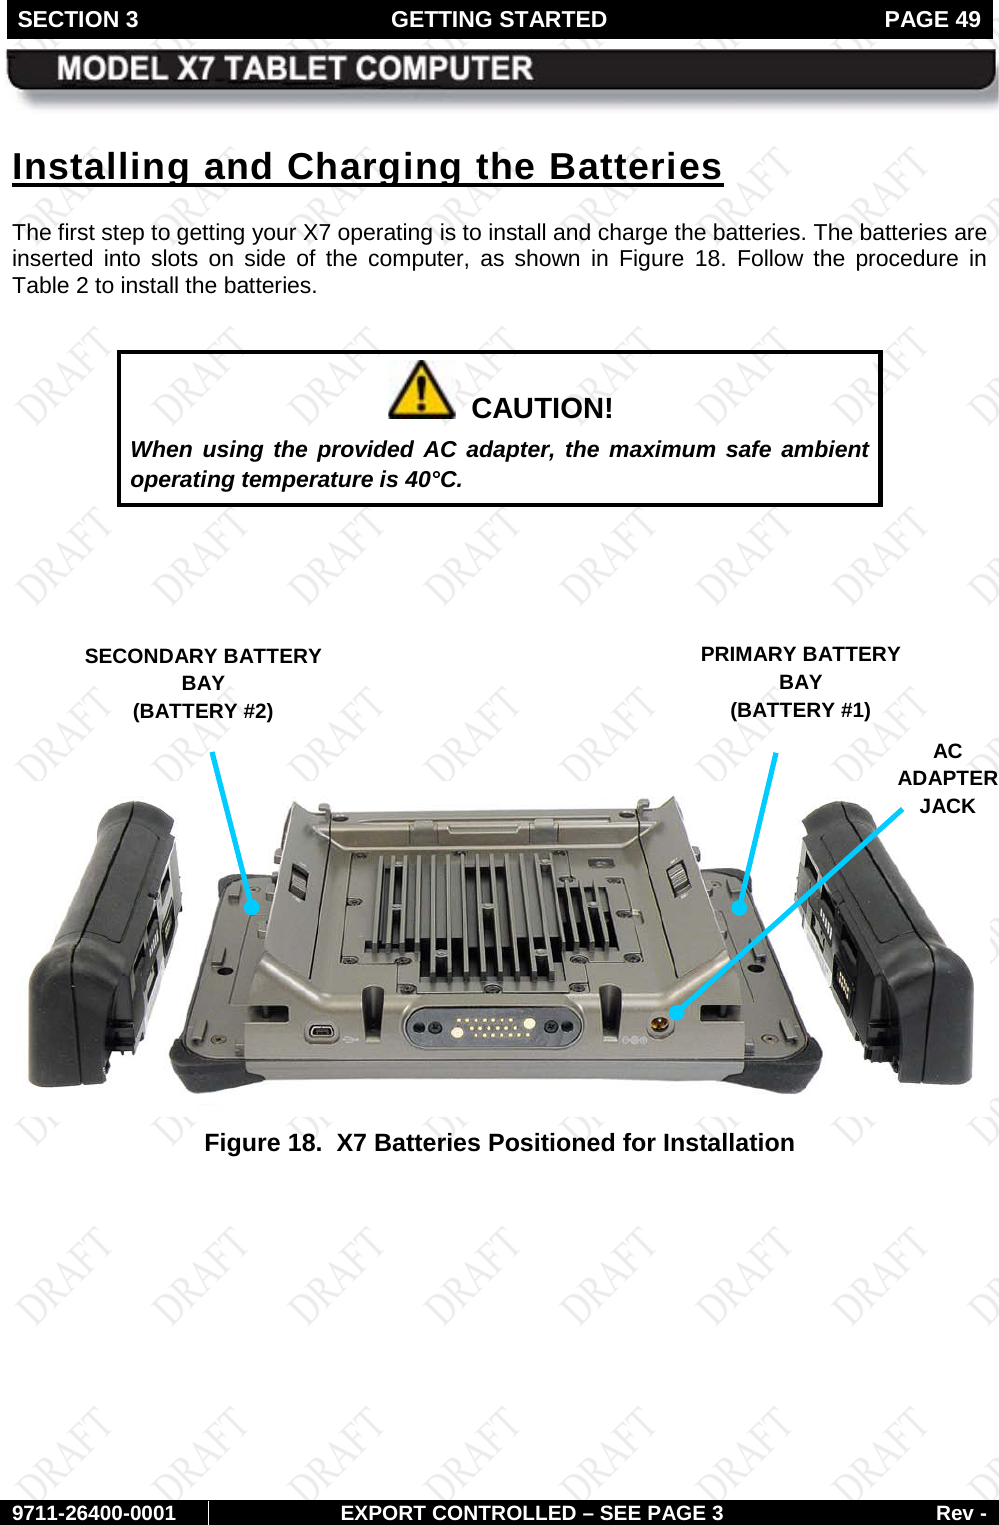 SECTION 3 GETTING STARTED  PAGE 49        9711-26400-0001 EXPORT CONTROLLED – SEE PAGE 3 Rev - Installing and Charging the Batteries The first step to getting your X7 operating is to install and charge the batteries. The batteries are inserted into slots on side of the computer, as shown in Figure  18. Follow the procedure in Table 2 to install the batteries.    CAUTION! When using the provided AC adapter, the maximum safe ambient operating temperature is 40°C.         Figure 18.  X7 Batteries Positioned for Installation   PRIMARY BATTERY BAY  (BATTERY #1) SECONDARY BATTERY BAY  (BATTERY #2) AC ADAPTER  JACK 